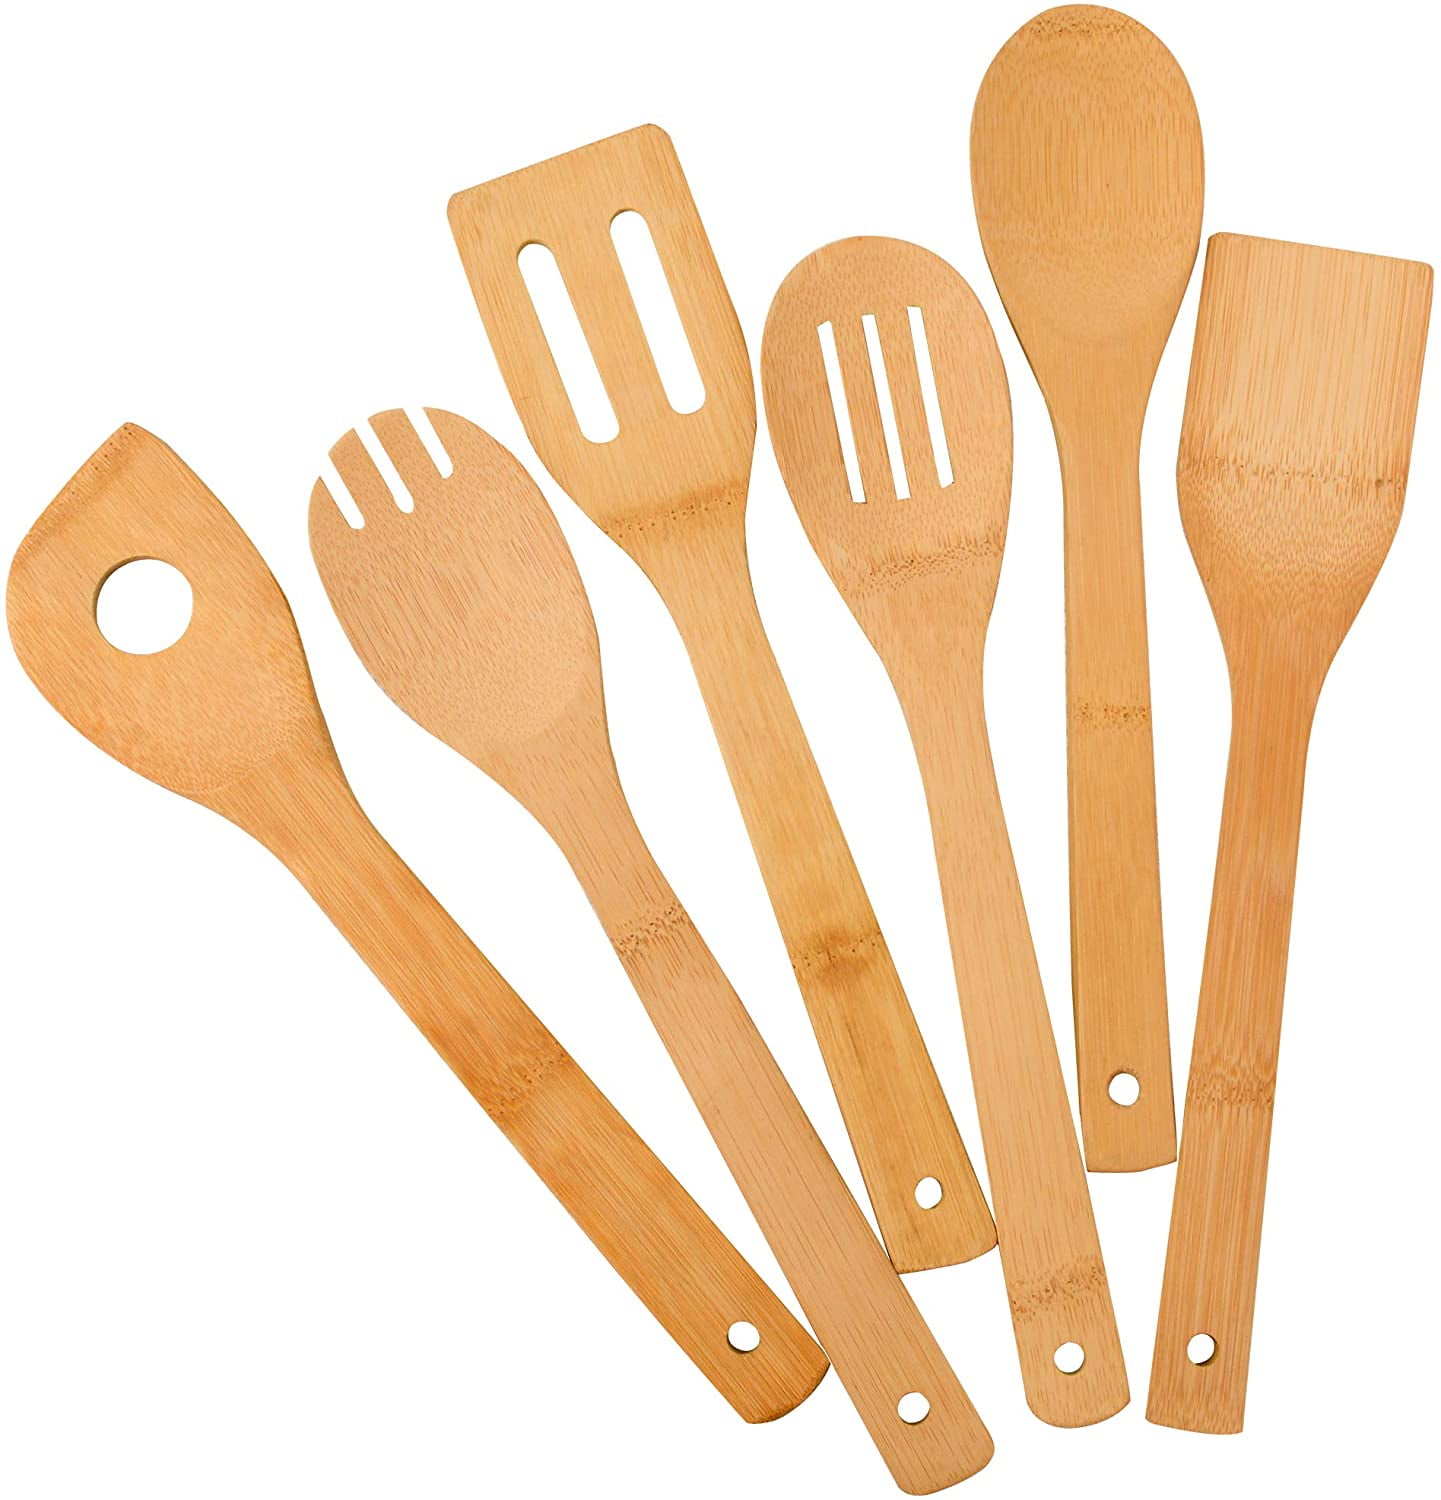 Fashion Bamboo Wooden Kitchen Cooking Utensils Set Tools Spatula Spoon Turner 